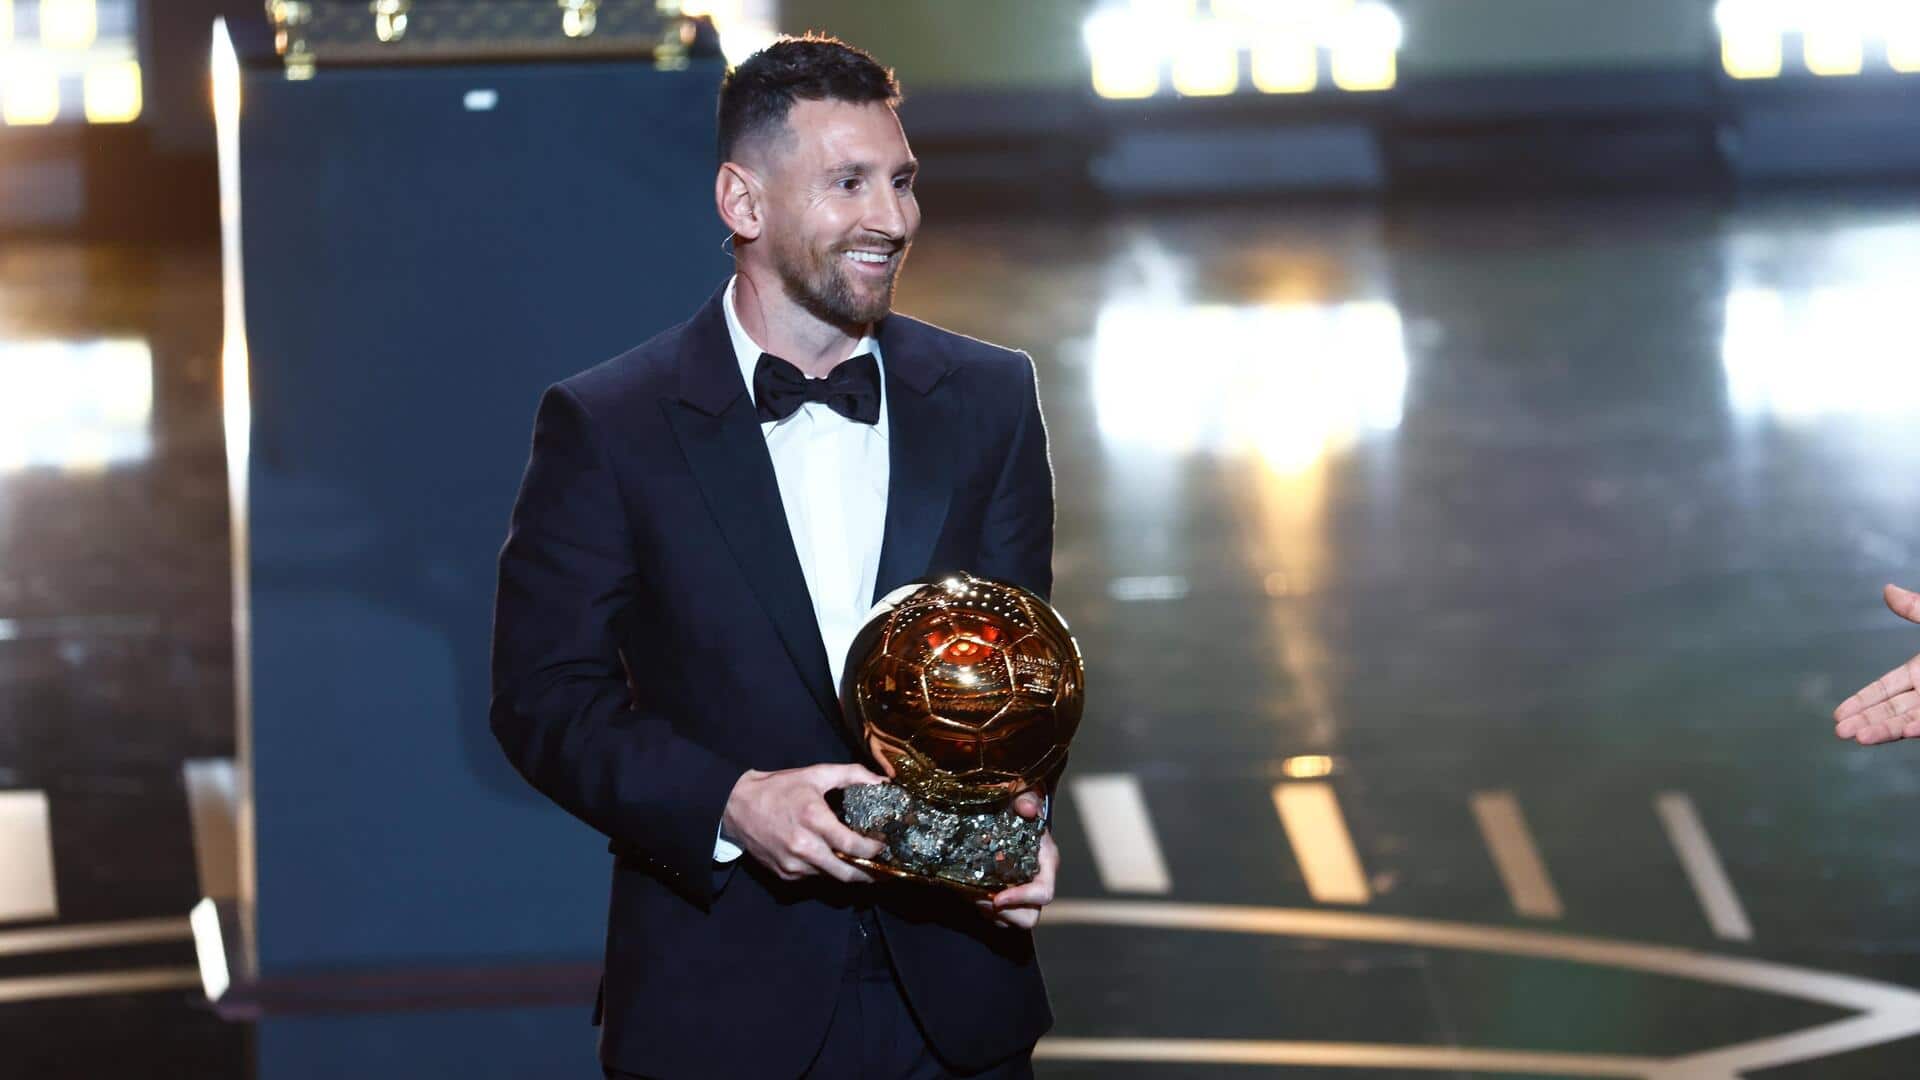 Lionel Messi wins his eighth Ballon d'Or award